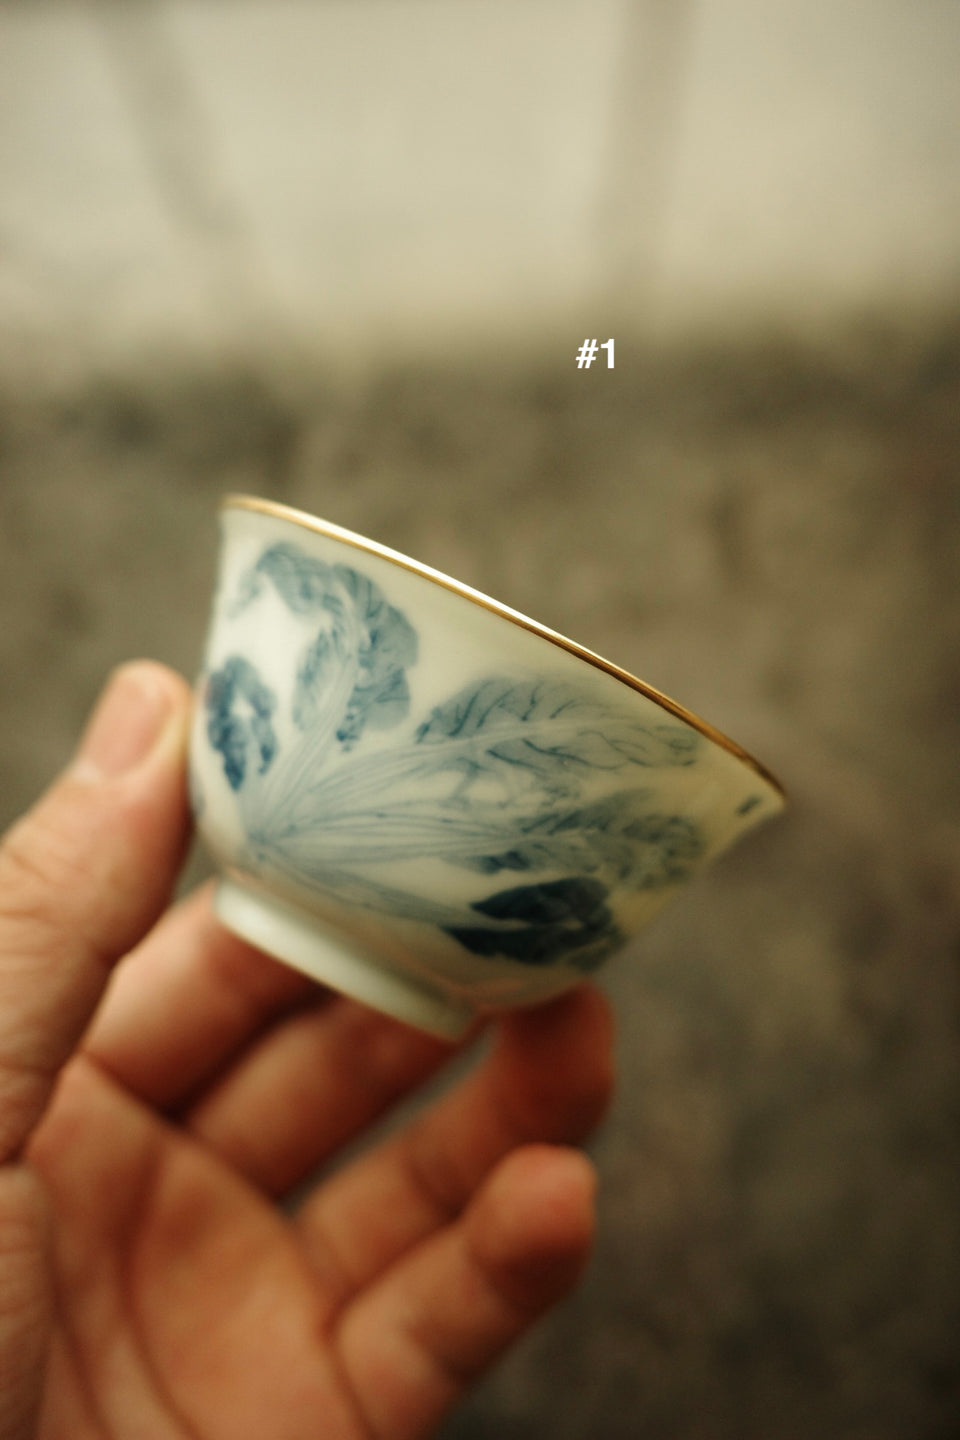 Chinese Cabbage Qinghua Teacups with Gold Rims by Li Junna